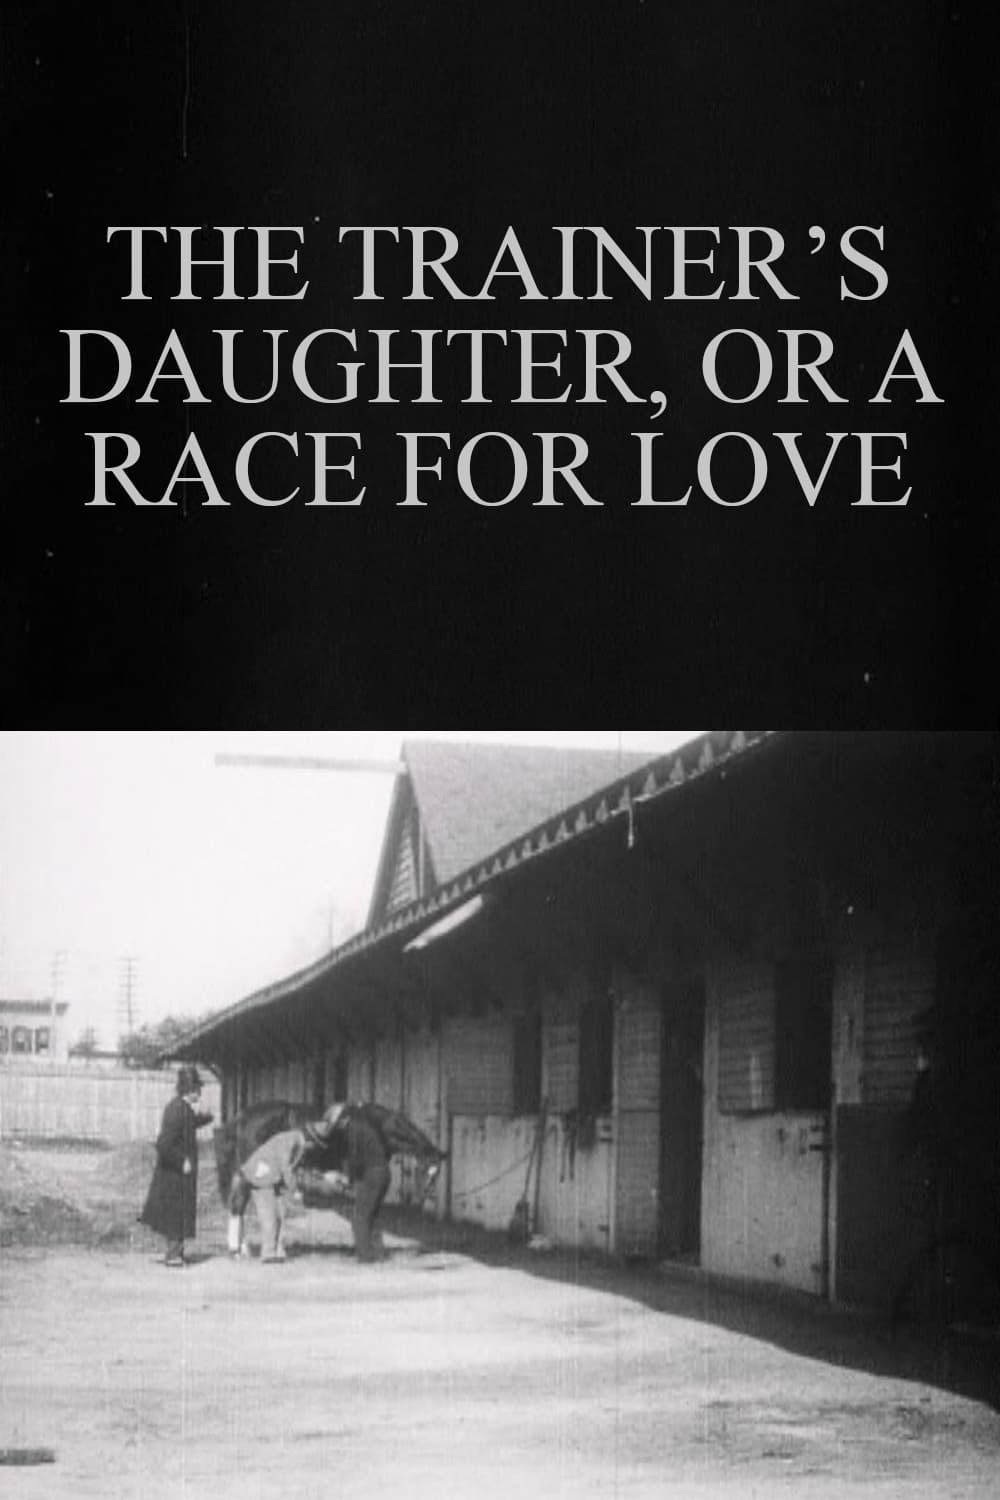 The Trainer’s Daughter, or A Race for Love